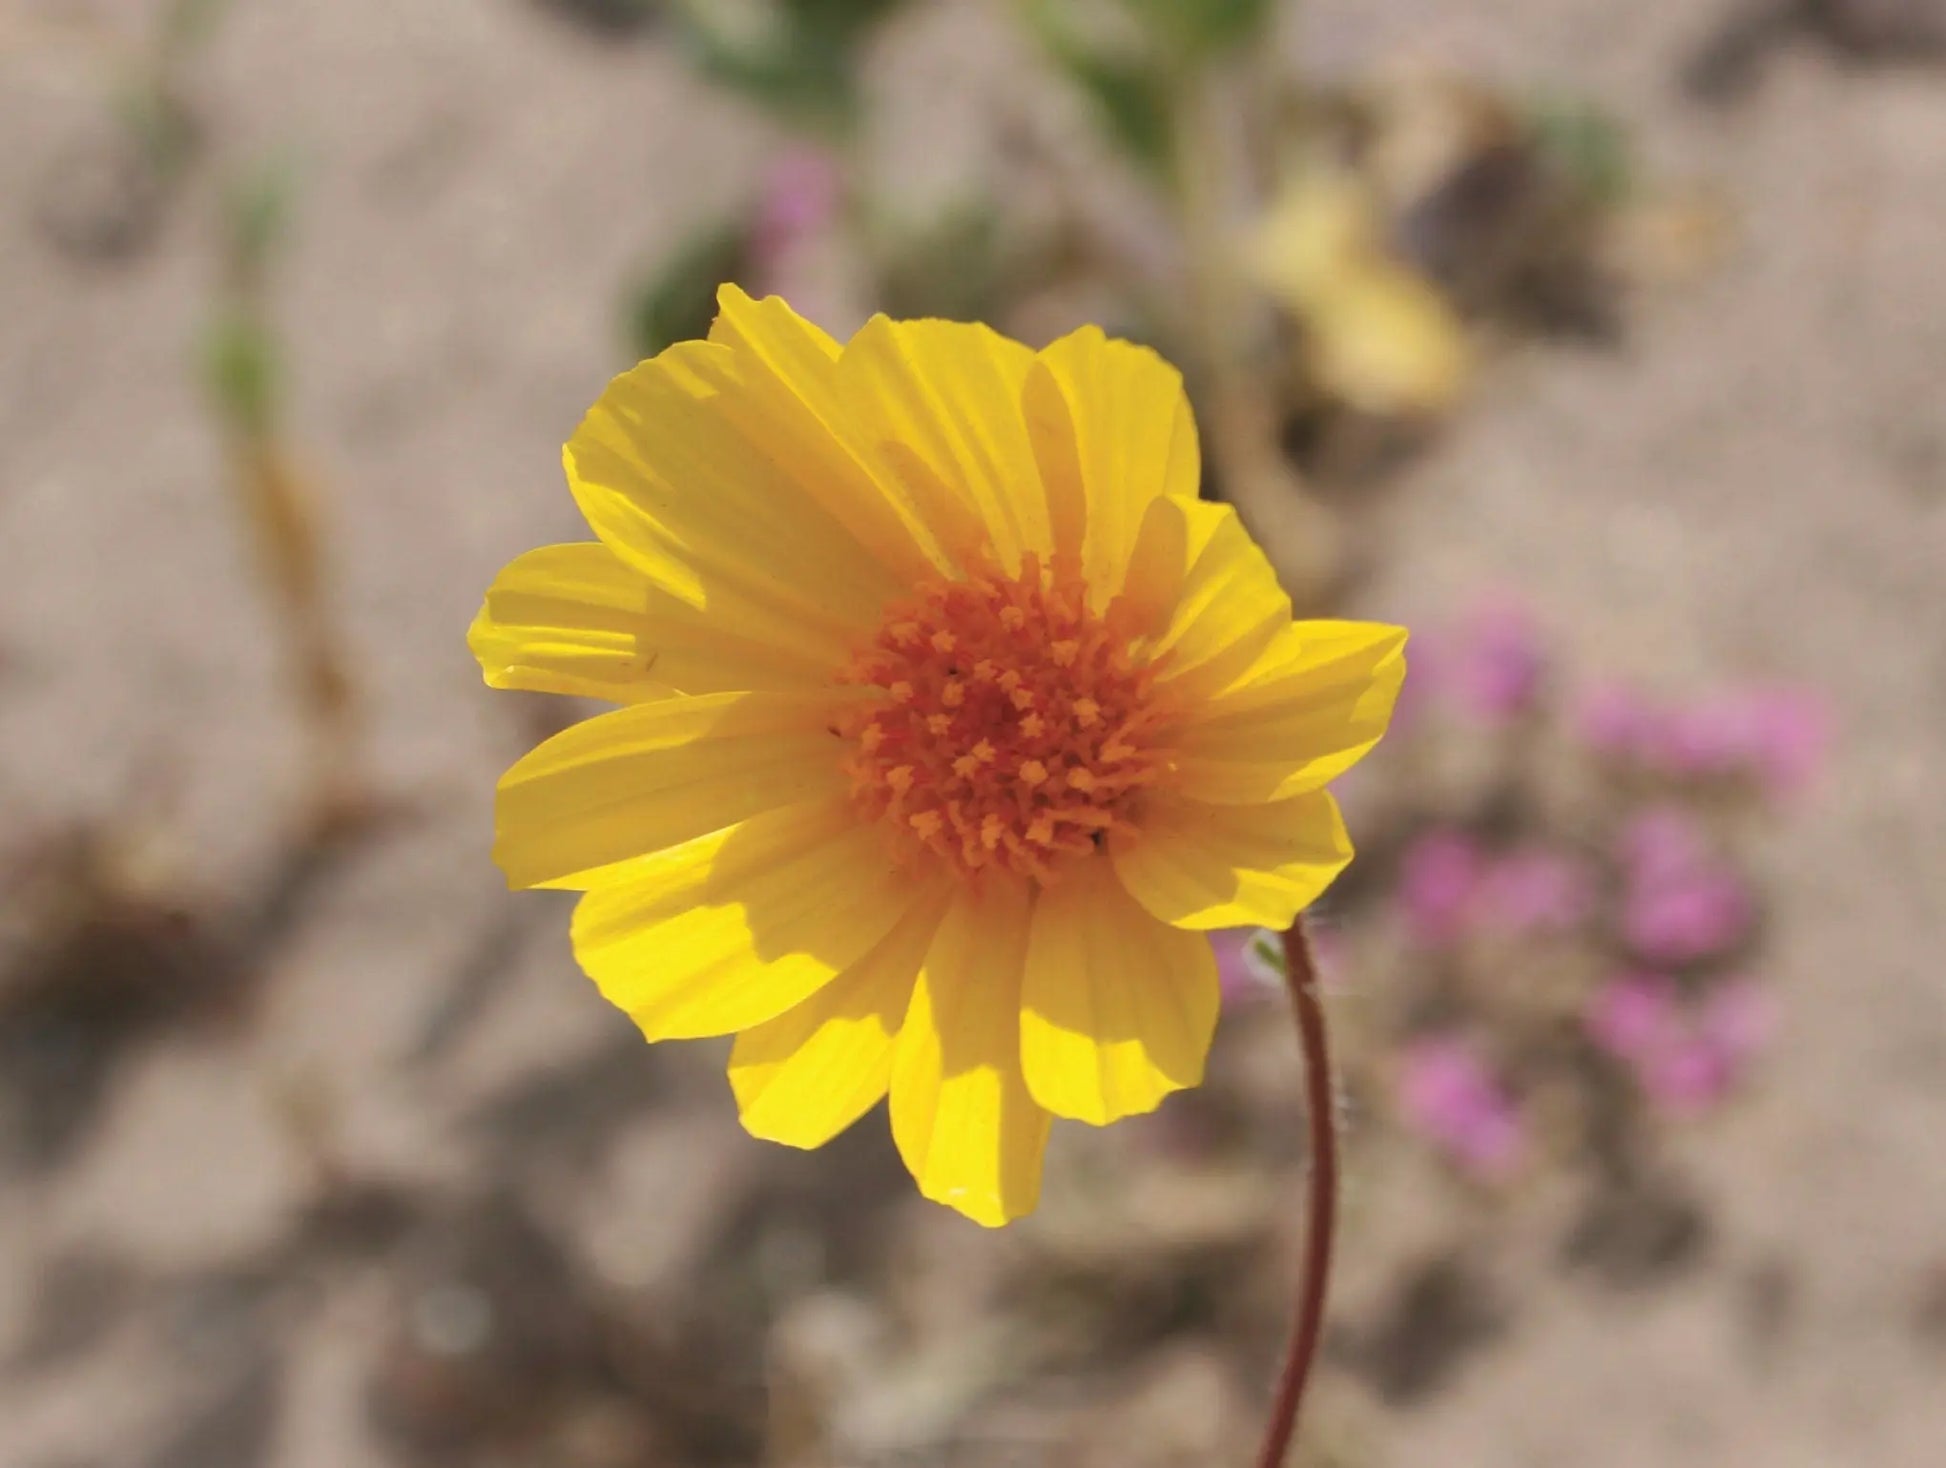 A close-up photo of a bright yellow Desert Gold wildflower in full bloom at Death Valley National Park. The harsh desert landscape with its sandy earth  stretches out in the background.